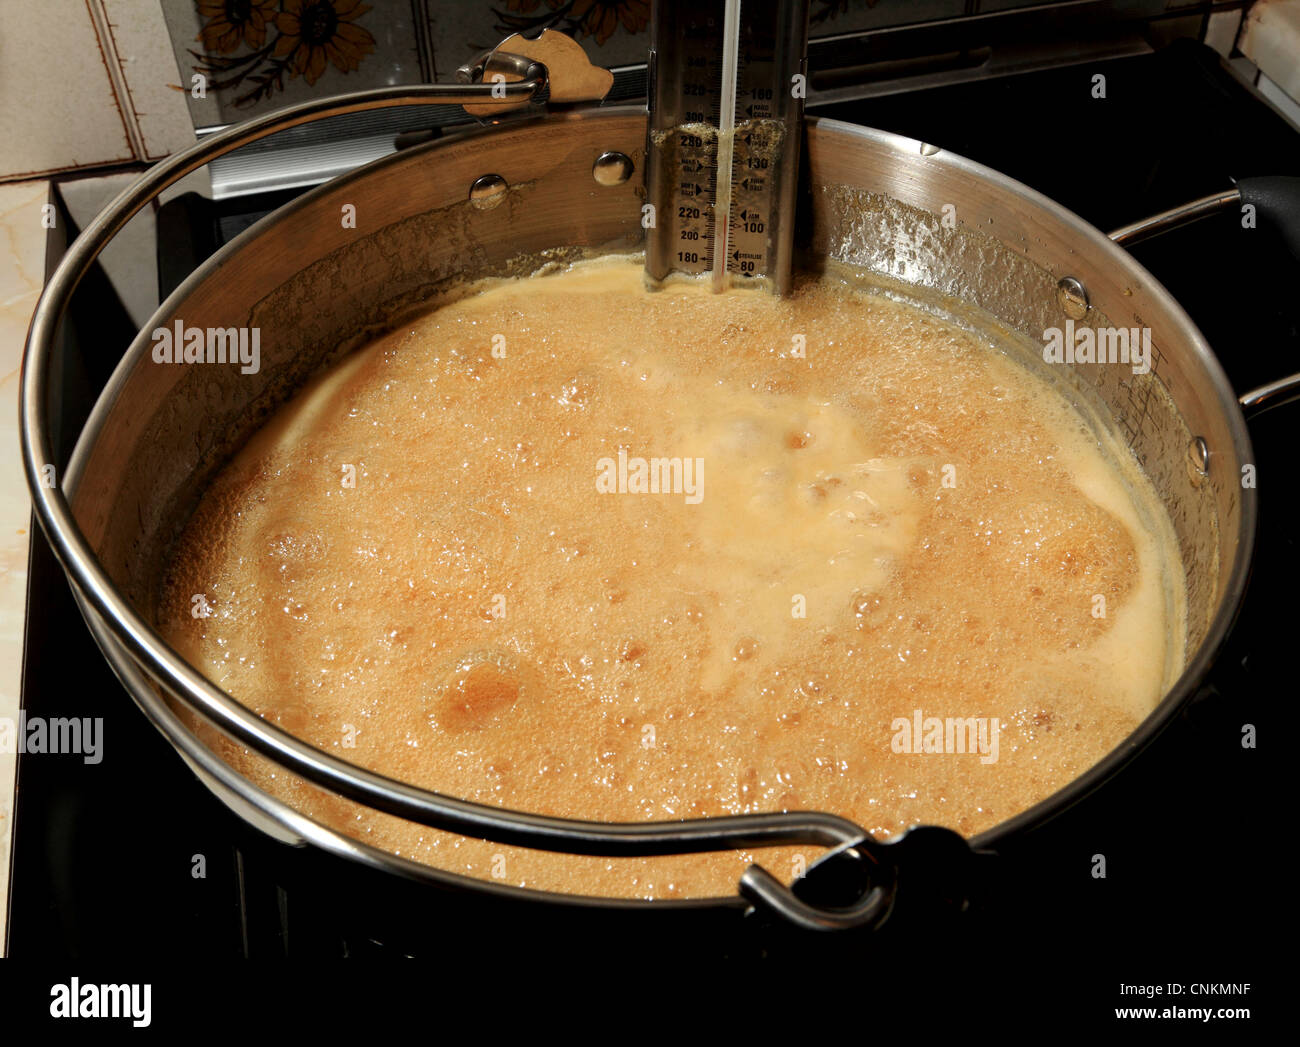 3735. Marmalade making, rolling boil at 106c Stock Photo